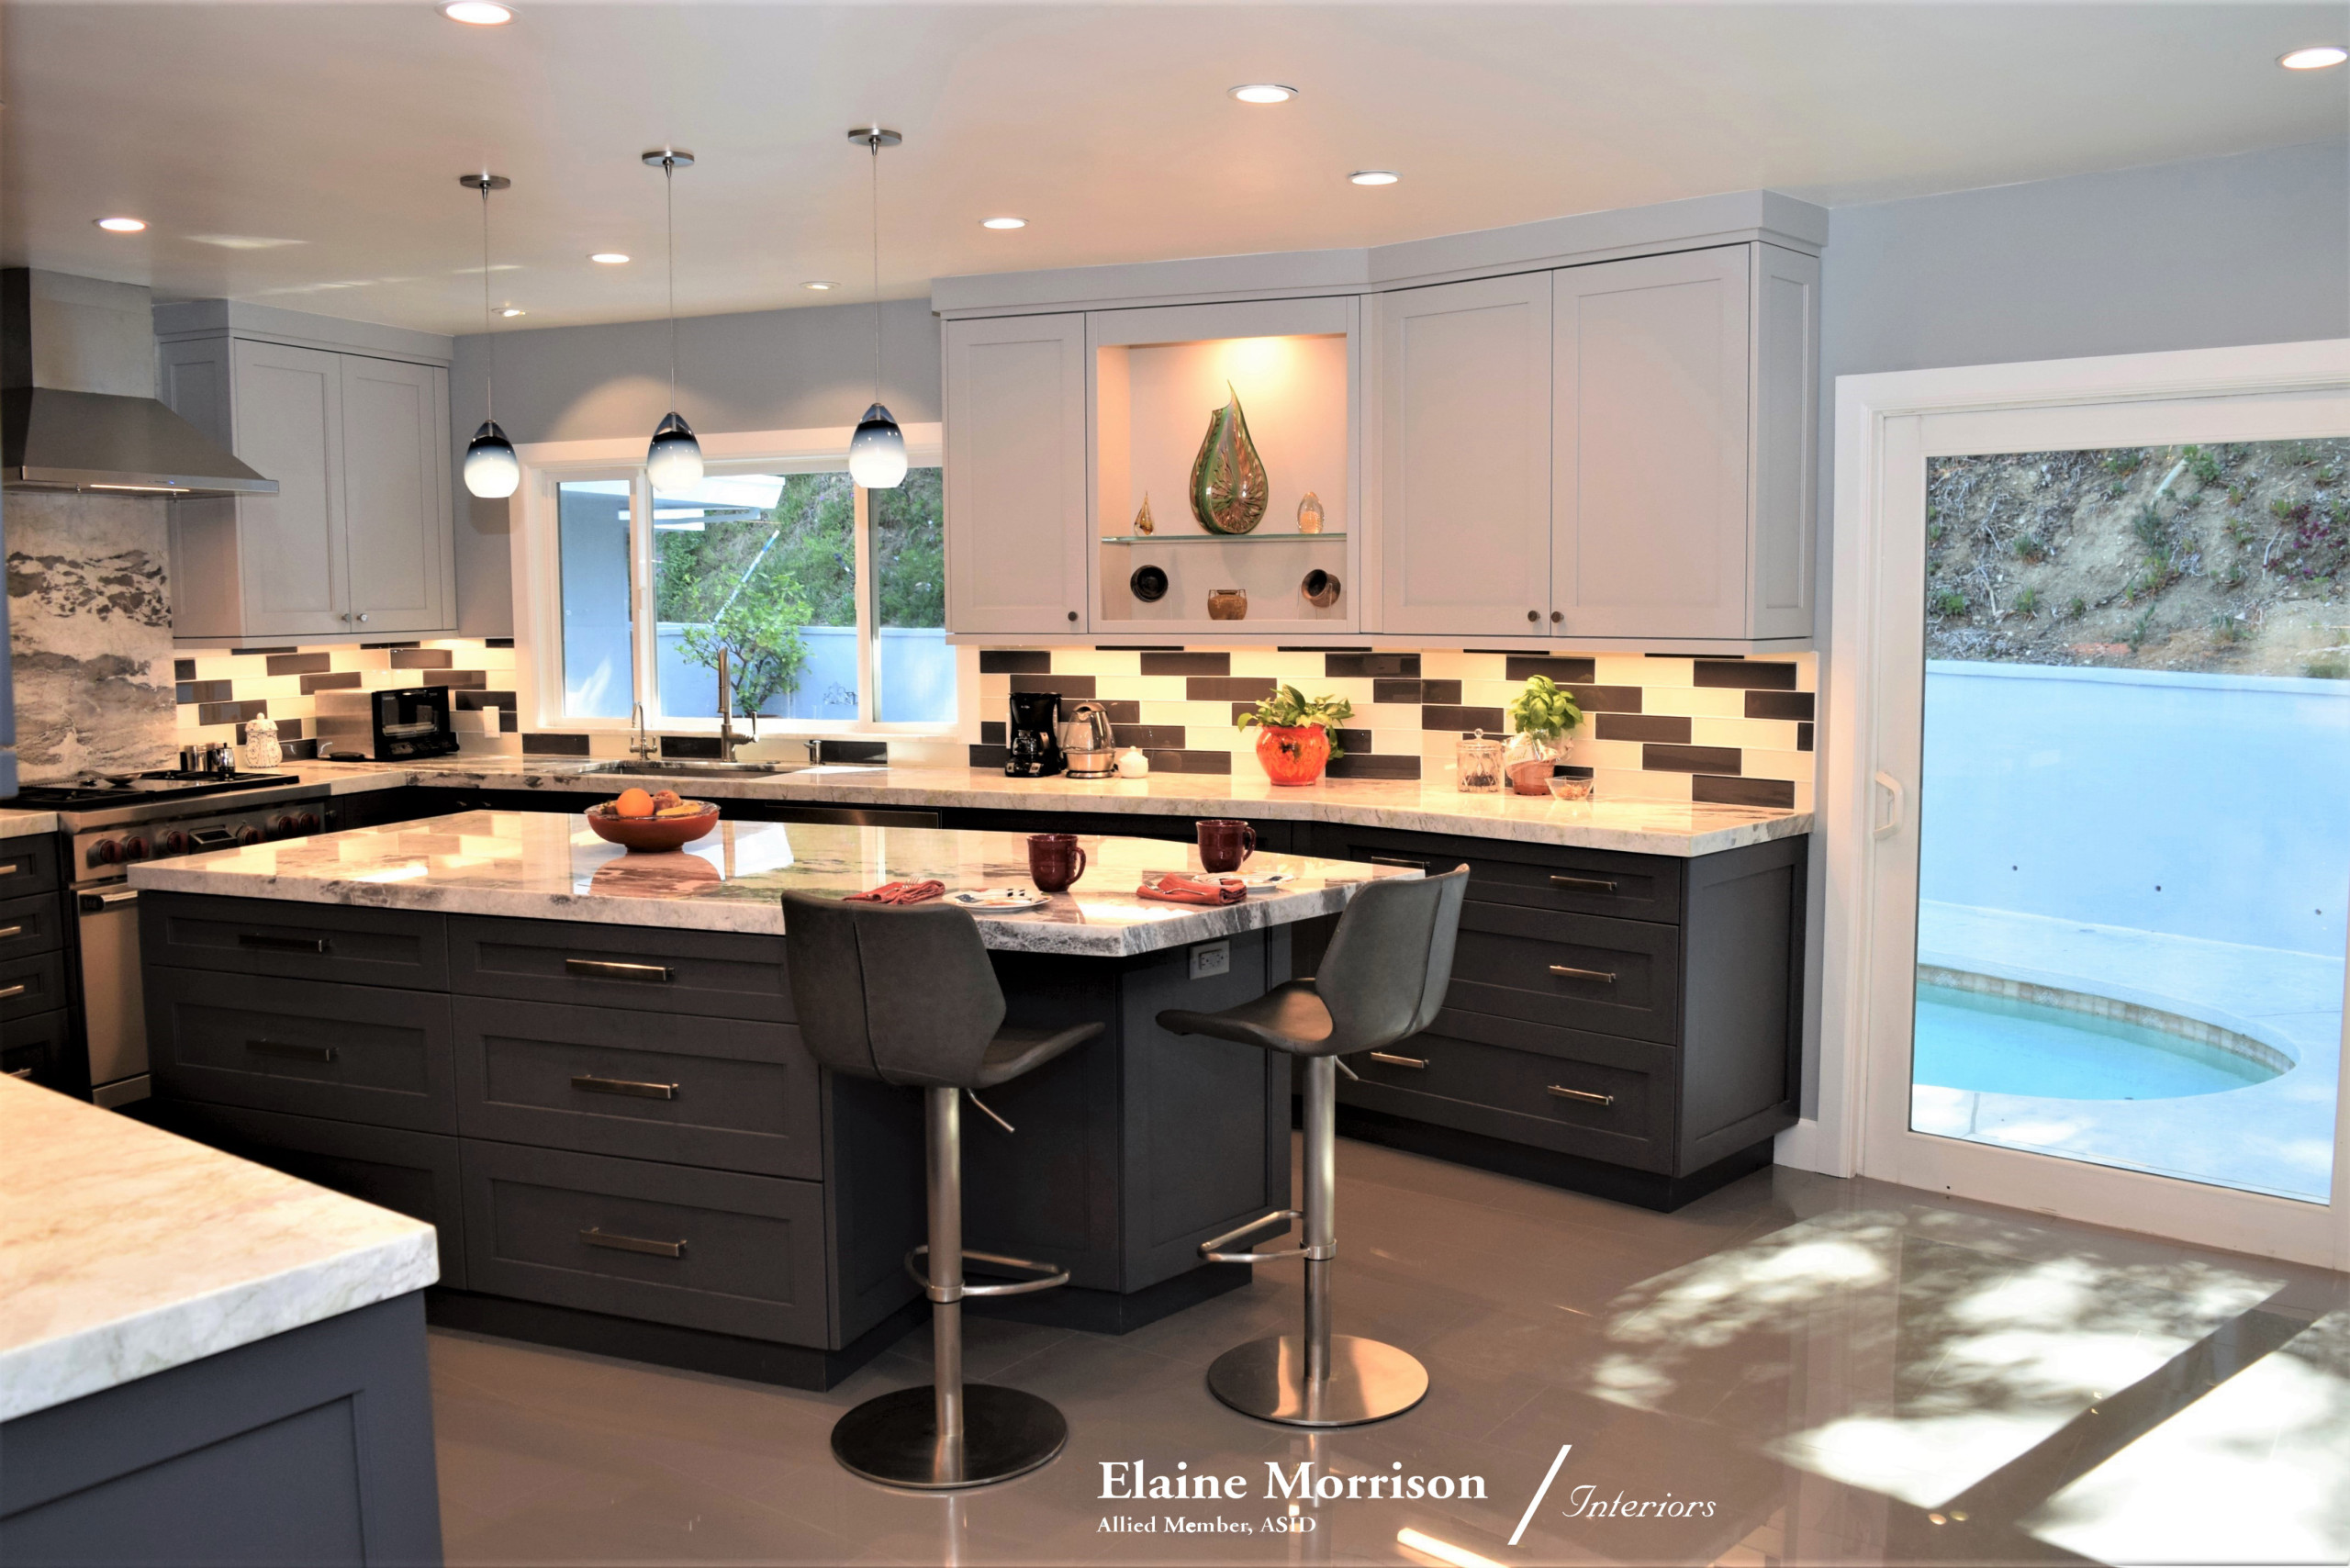 My Transitional Kitchen Remodel for a Client in Sherman Oaks, Ca.